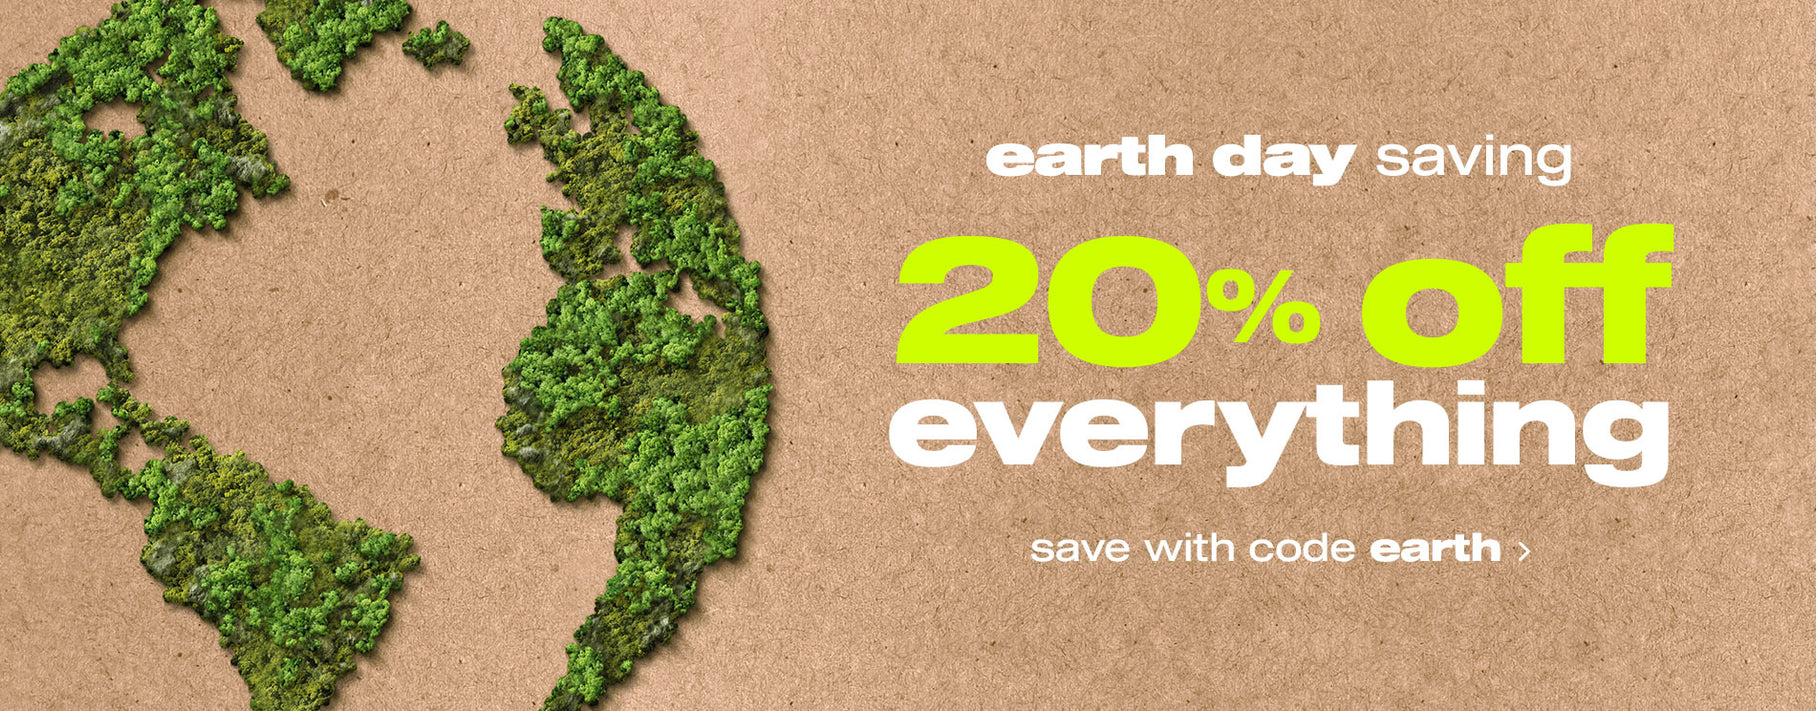 Earth Day Saving: 20% Off Everything! Save With Code EARTH